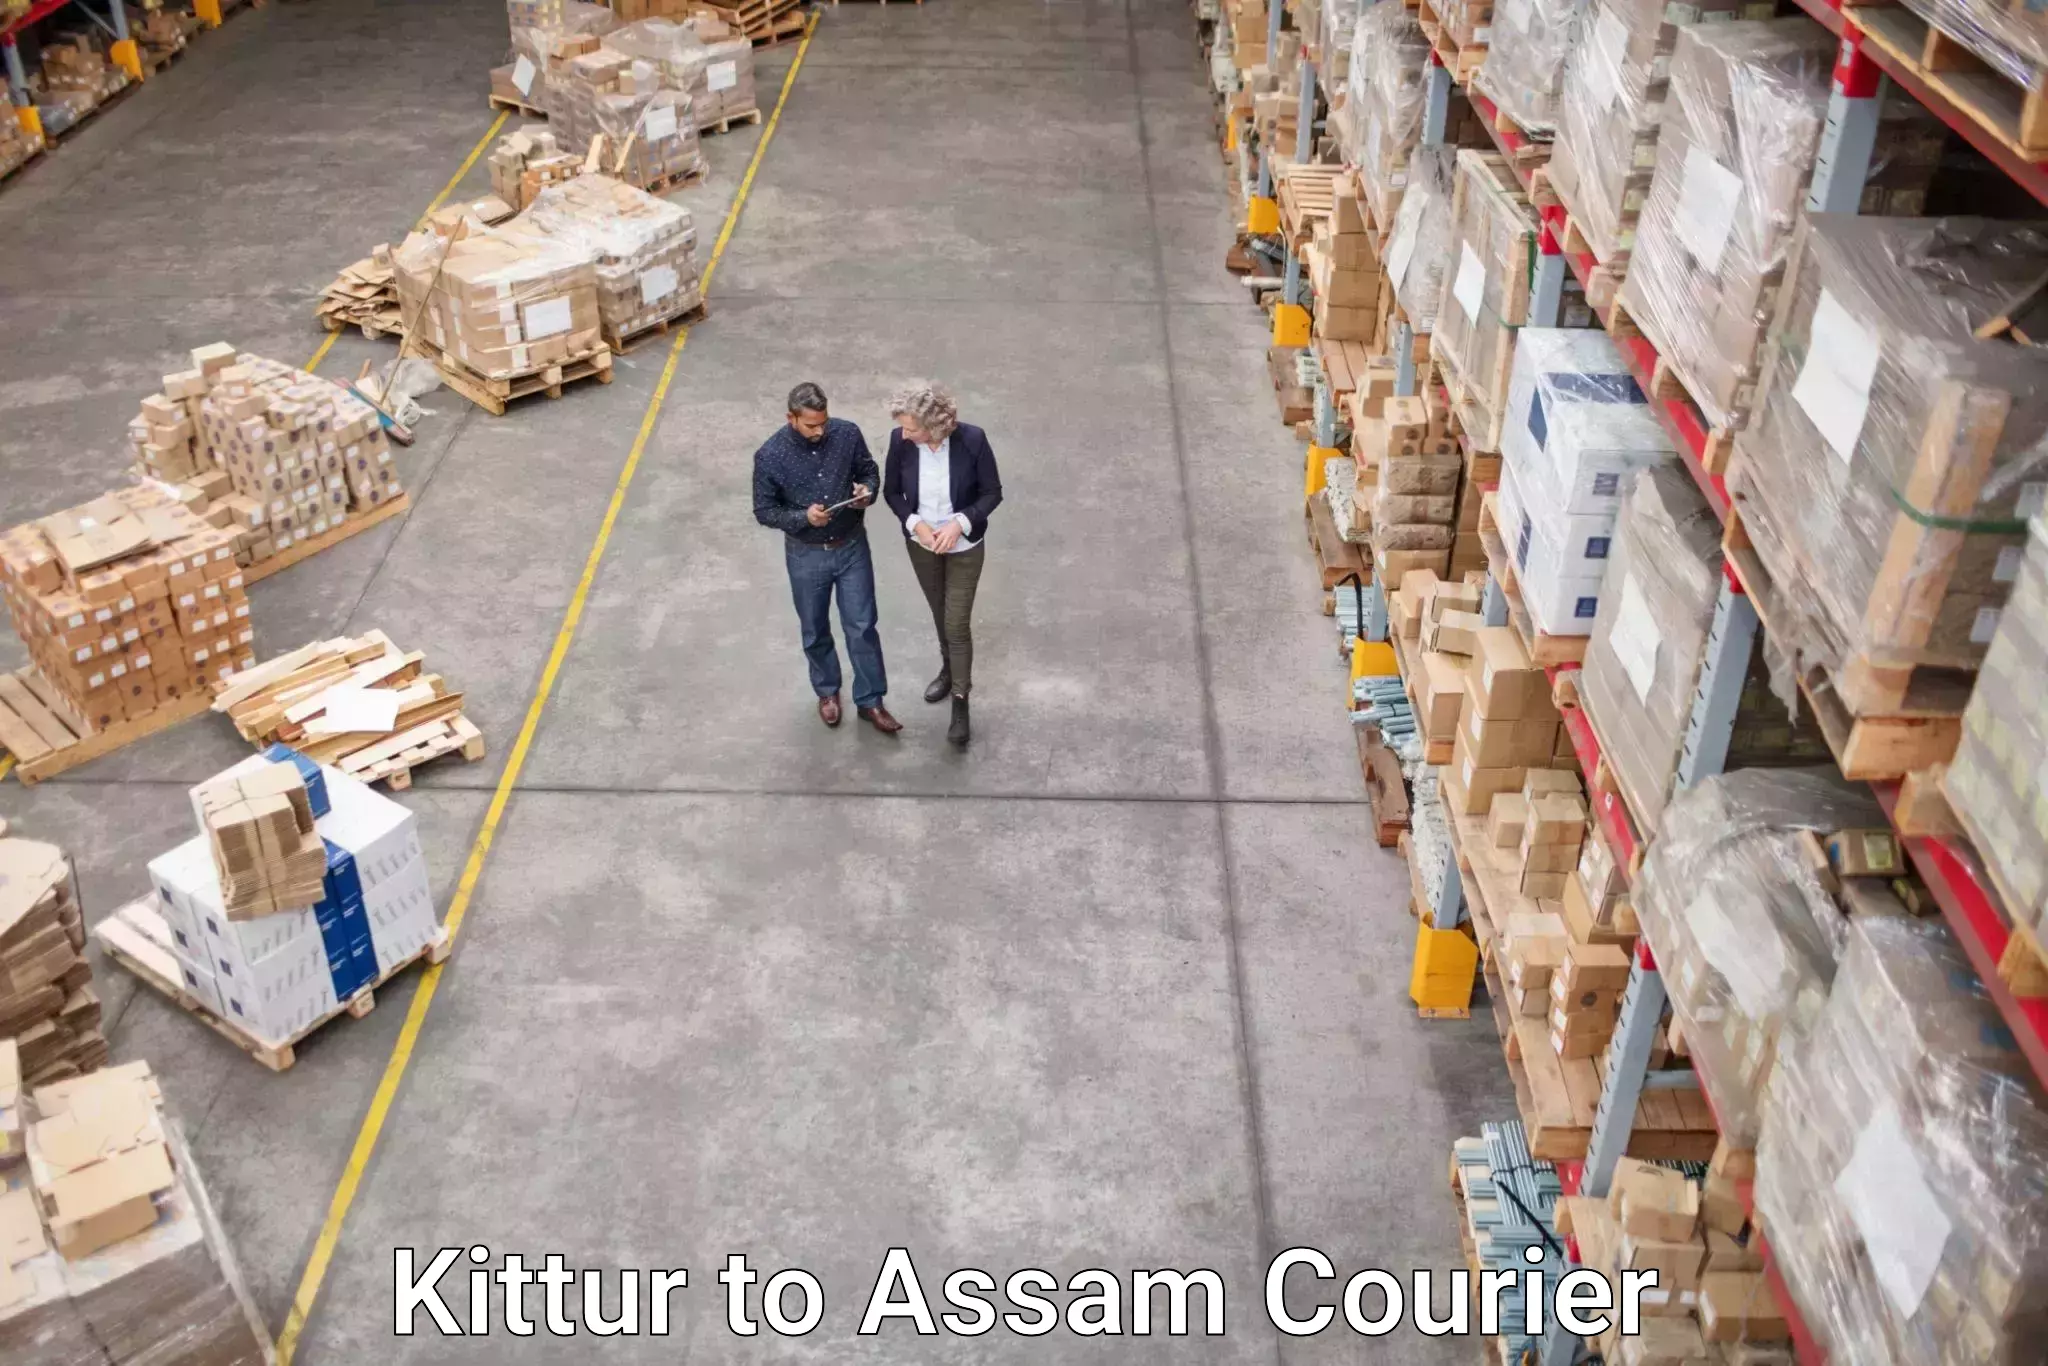 Express delivery network Kittur to Assam